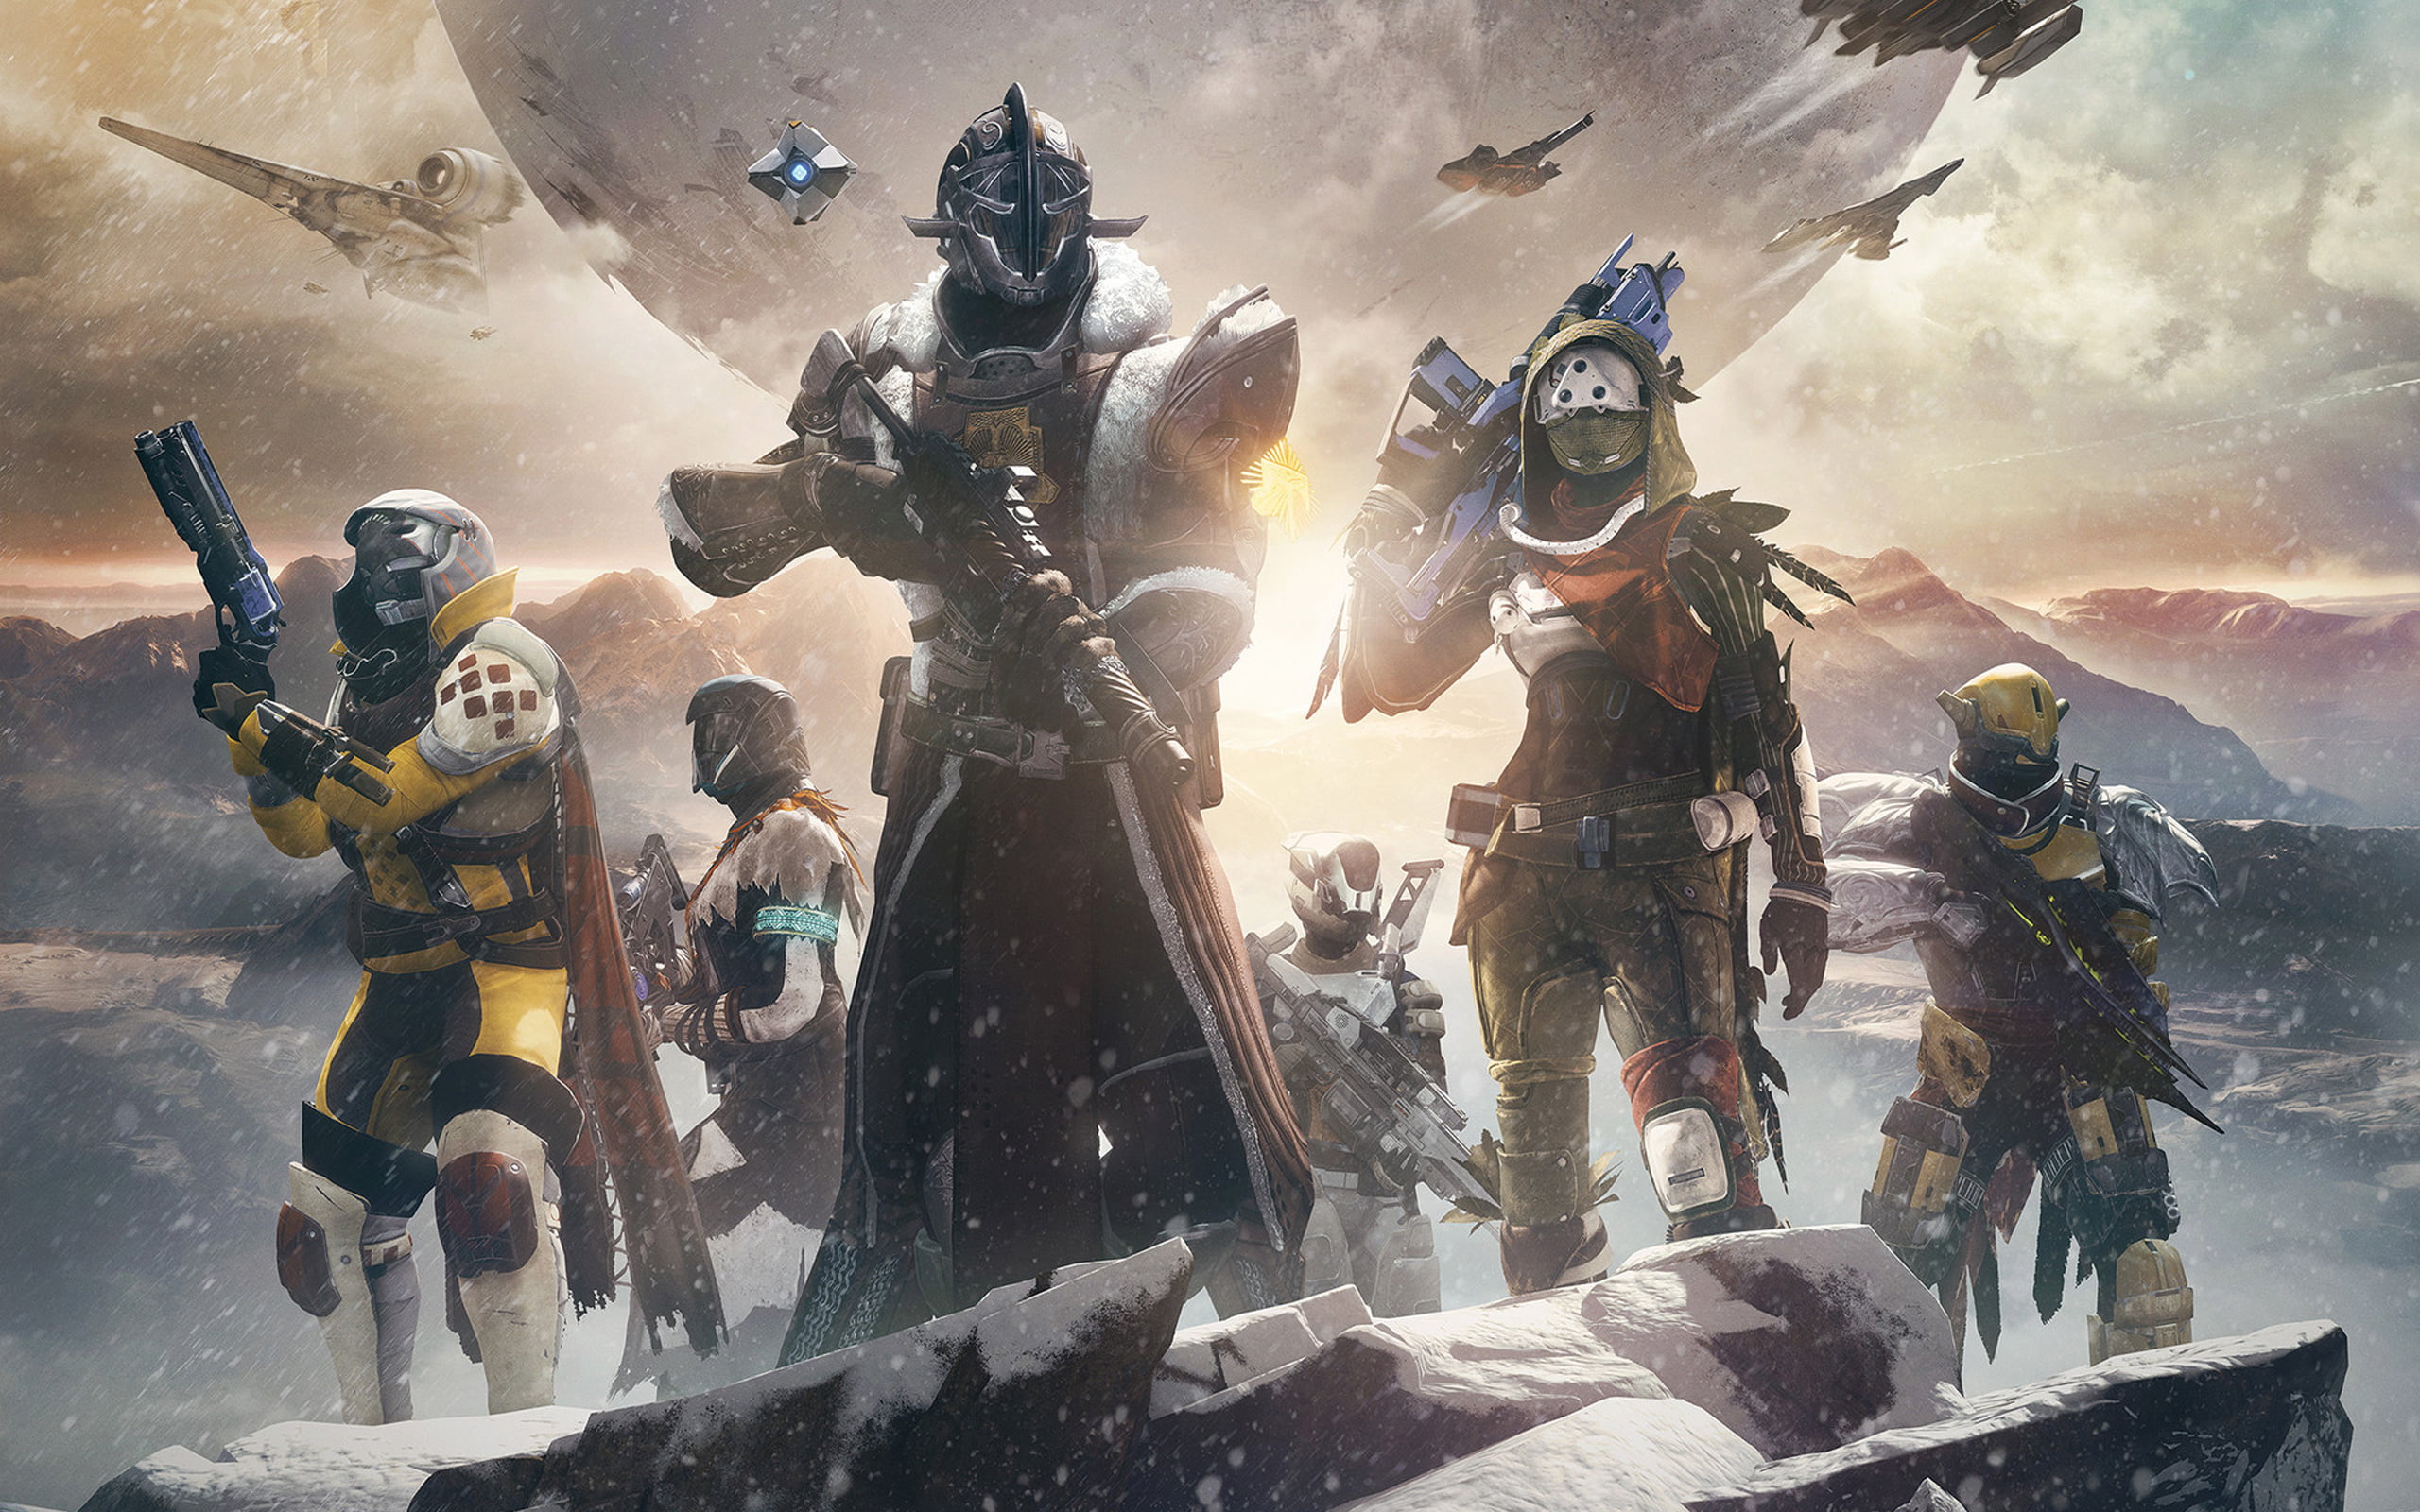 Destiny 2 (video game), video games, science fiction, the traveler